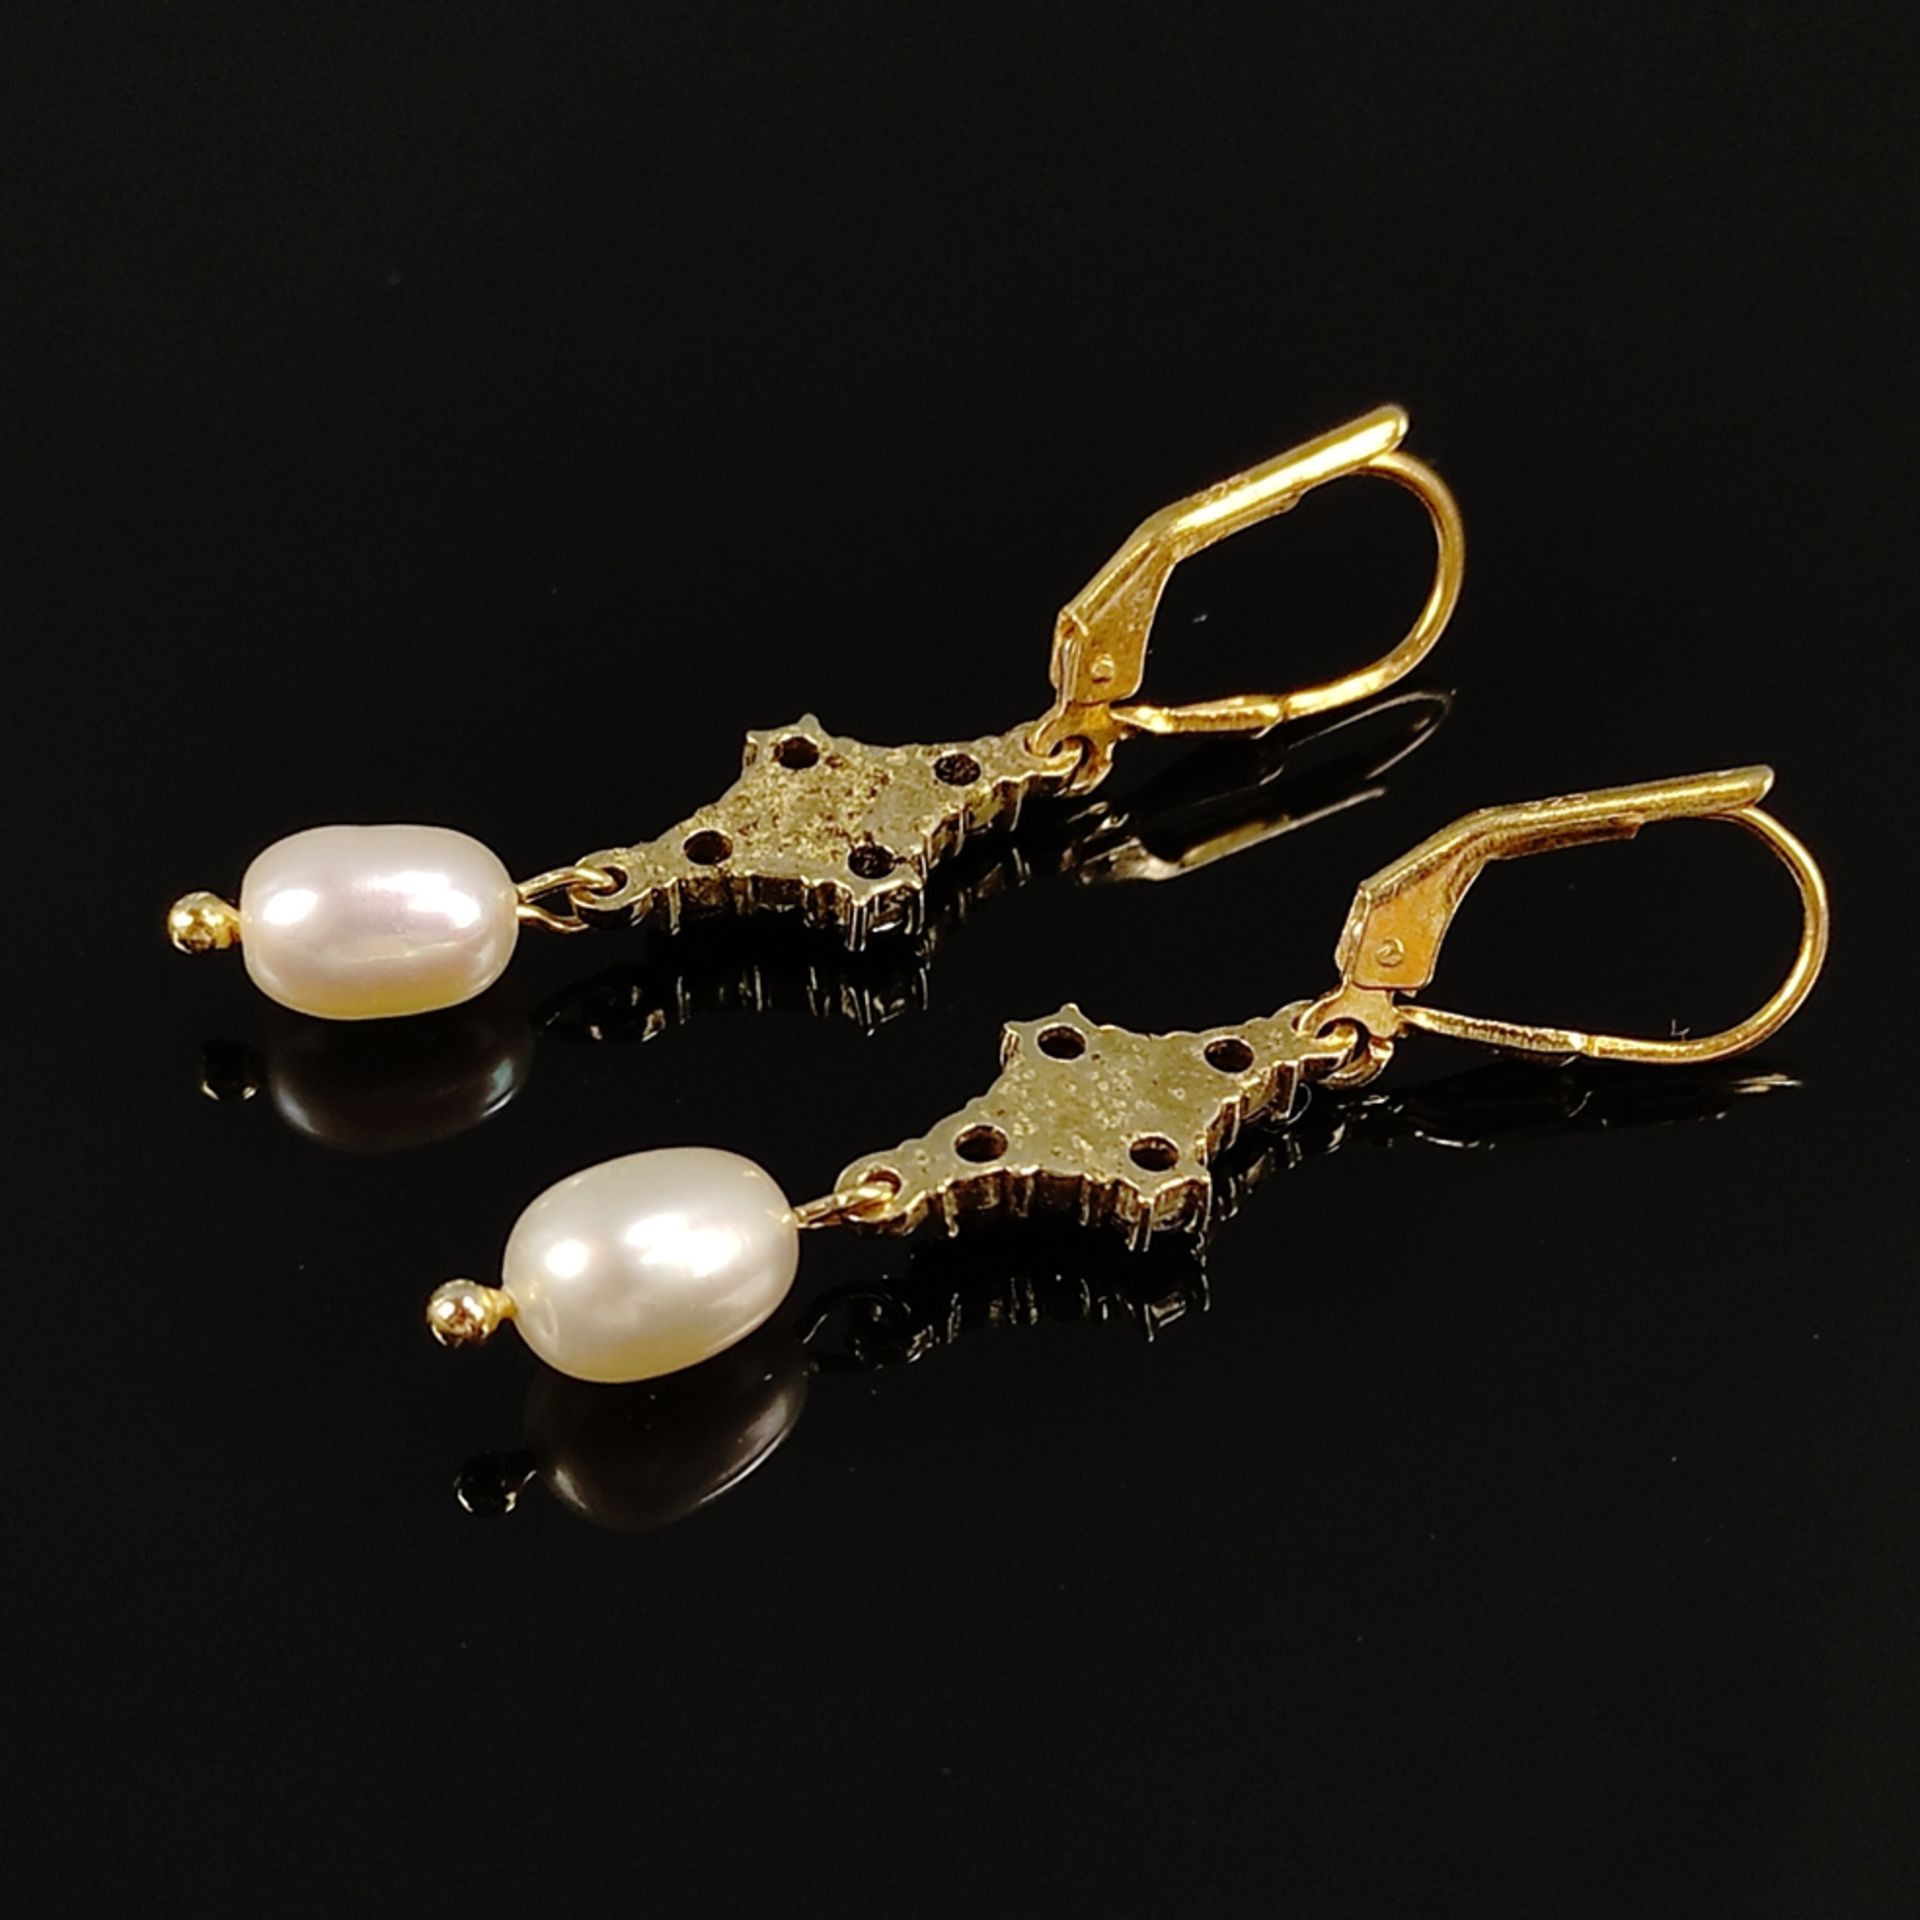 Garnet pearl earrings, silver 925 in 333/8K yellow gold plated, 3,7g, hinged earwire with diamond s - Image 2 of 3